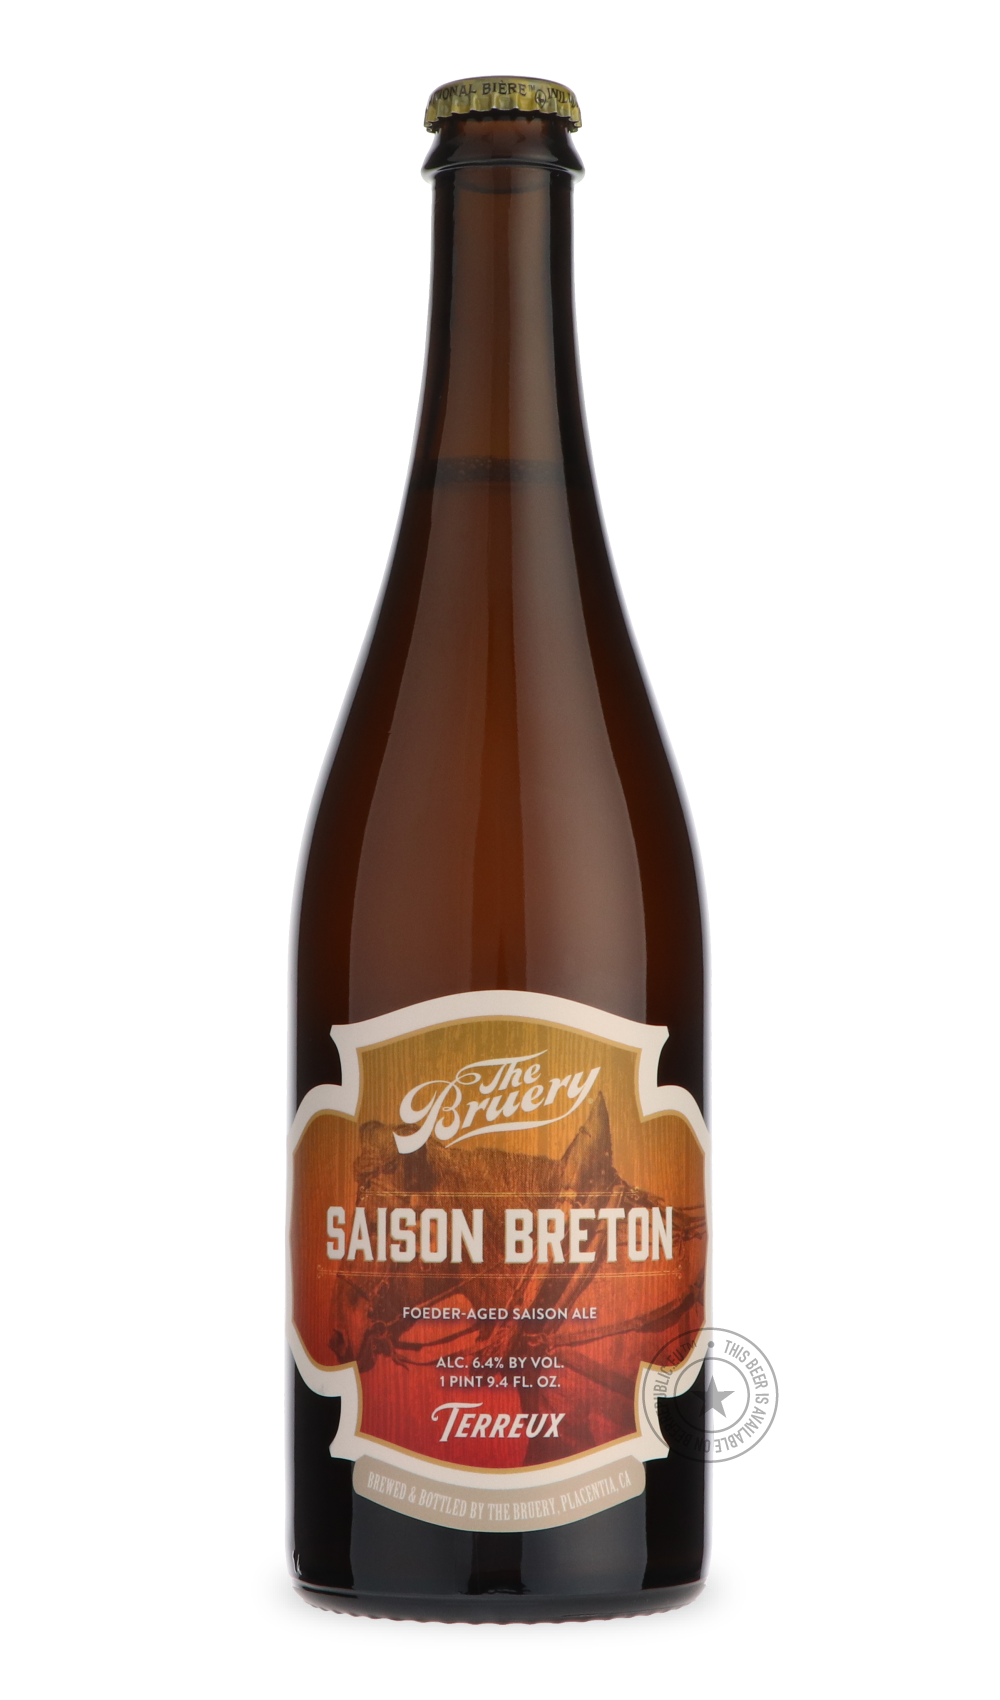 -The Bruery- Terreux Saison Breton-Sour / Wild & Fruity- Only @ Beer Republic - The best online beer store for American & Canadian craft beer - Buy beer online from the USA and Canada - Bier online kopen - Amerikaans bier kopen - Craft beer store - Craft beer kopen - Amerikanisch bier kaufen - Bier online kaufen - Acheter biere online - IPA - Stout - Porter - New England IPA - Hazy IPA - Imperial Stout - Barrel Aged - Barrel Aged Imperial Stout - Brown - Dark beer - Blond - Blonde - Pilsner - Lager - Wheat 